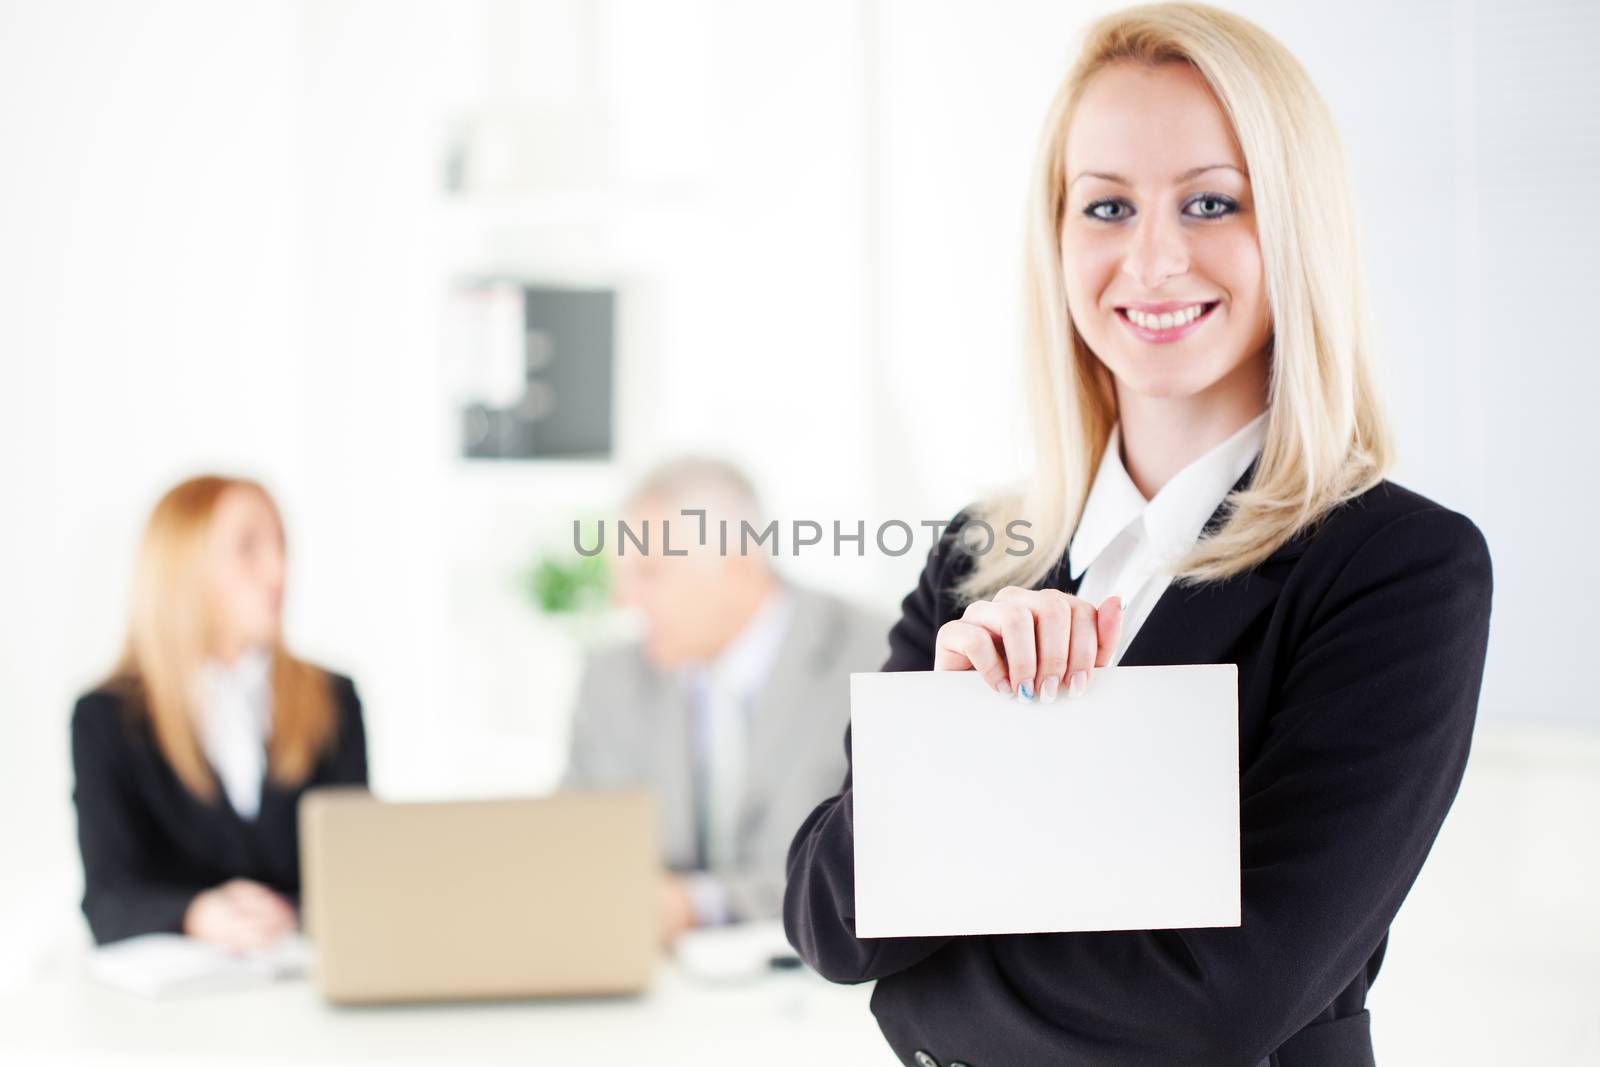 Beautiful young businesswoman holding Blank business card in the office. Looking at camera. Selective Focus.